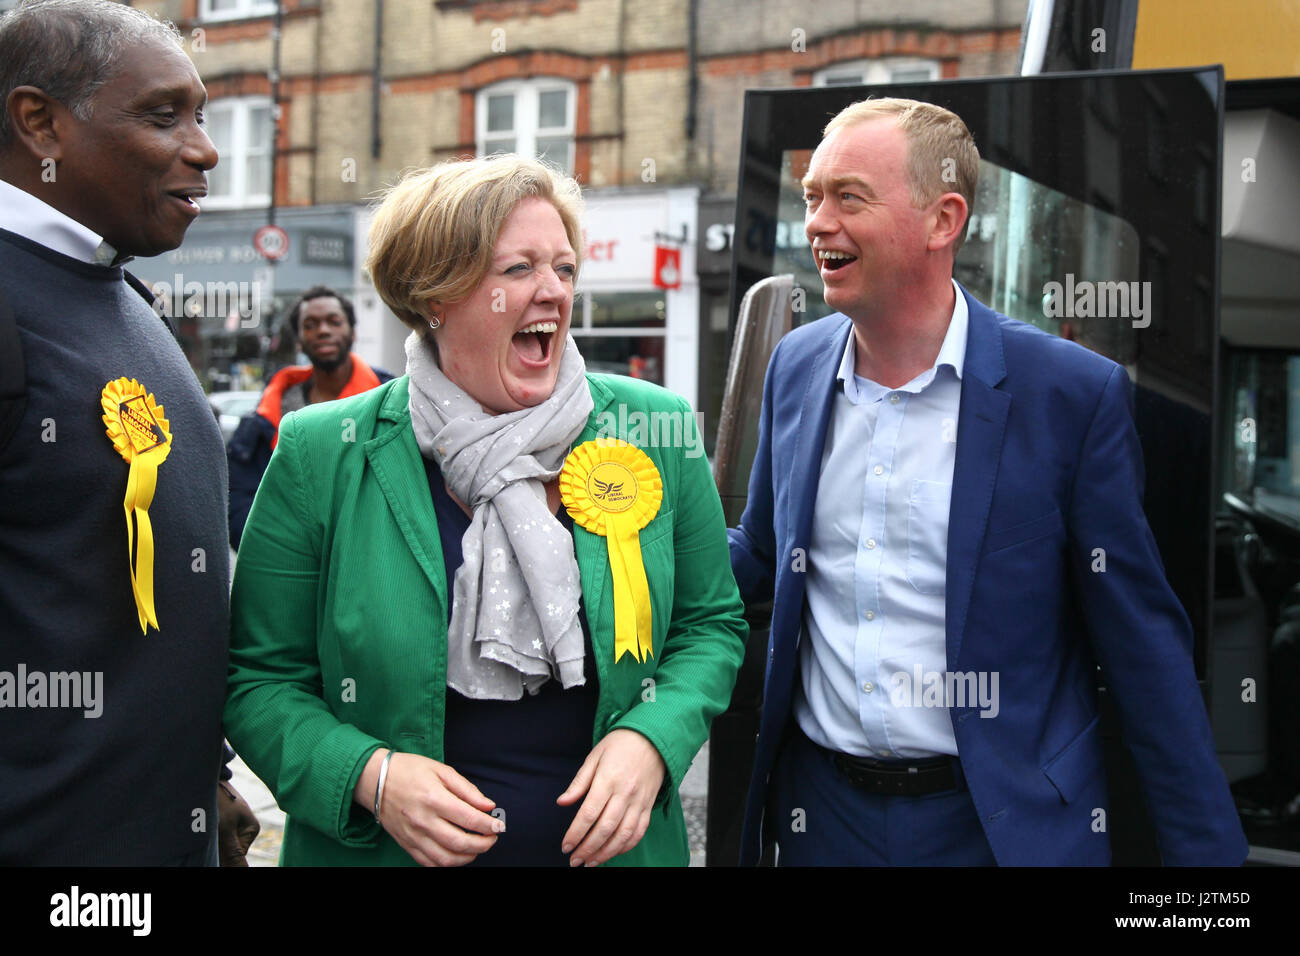 London, UK. 01st May, 2017.  Brian Haley candidate for Tottenham, Dawn Barnes  candidate  for Hornesy and Tim Farron (l to r) Liberal Democrat leader Tim Farron attends an election campaign event in Hornsey Town Hall on day one of his battle bus tour and is greeted by Dawn Barnes Lib Dem candidate for Hornsey and Wood Green. Credit: Dinendra Haria/Alamy Live News Stock Photo